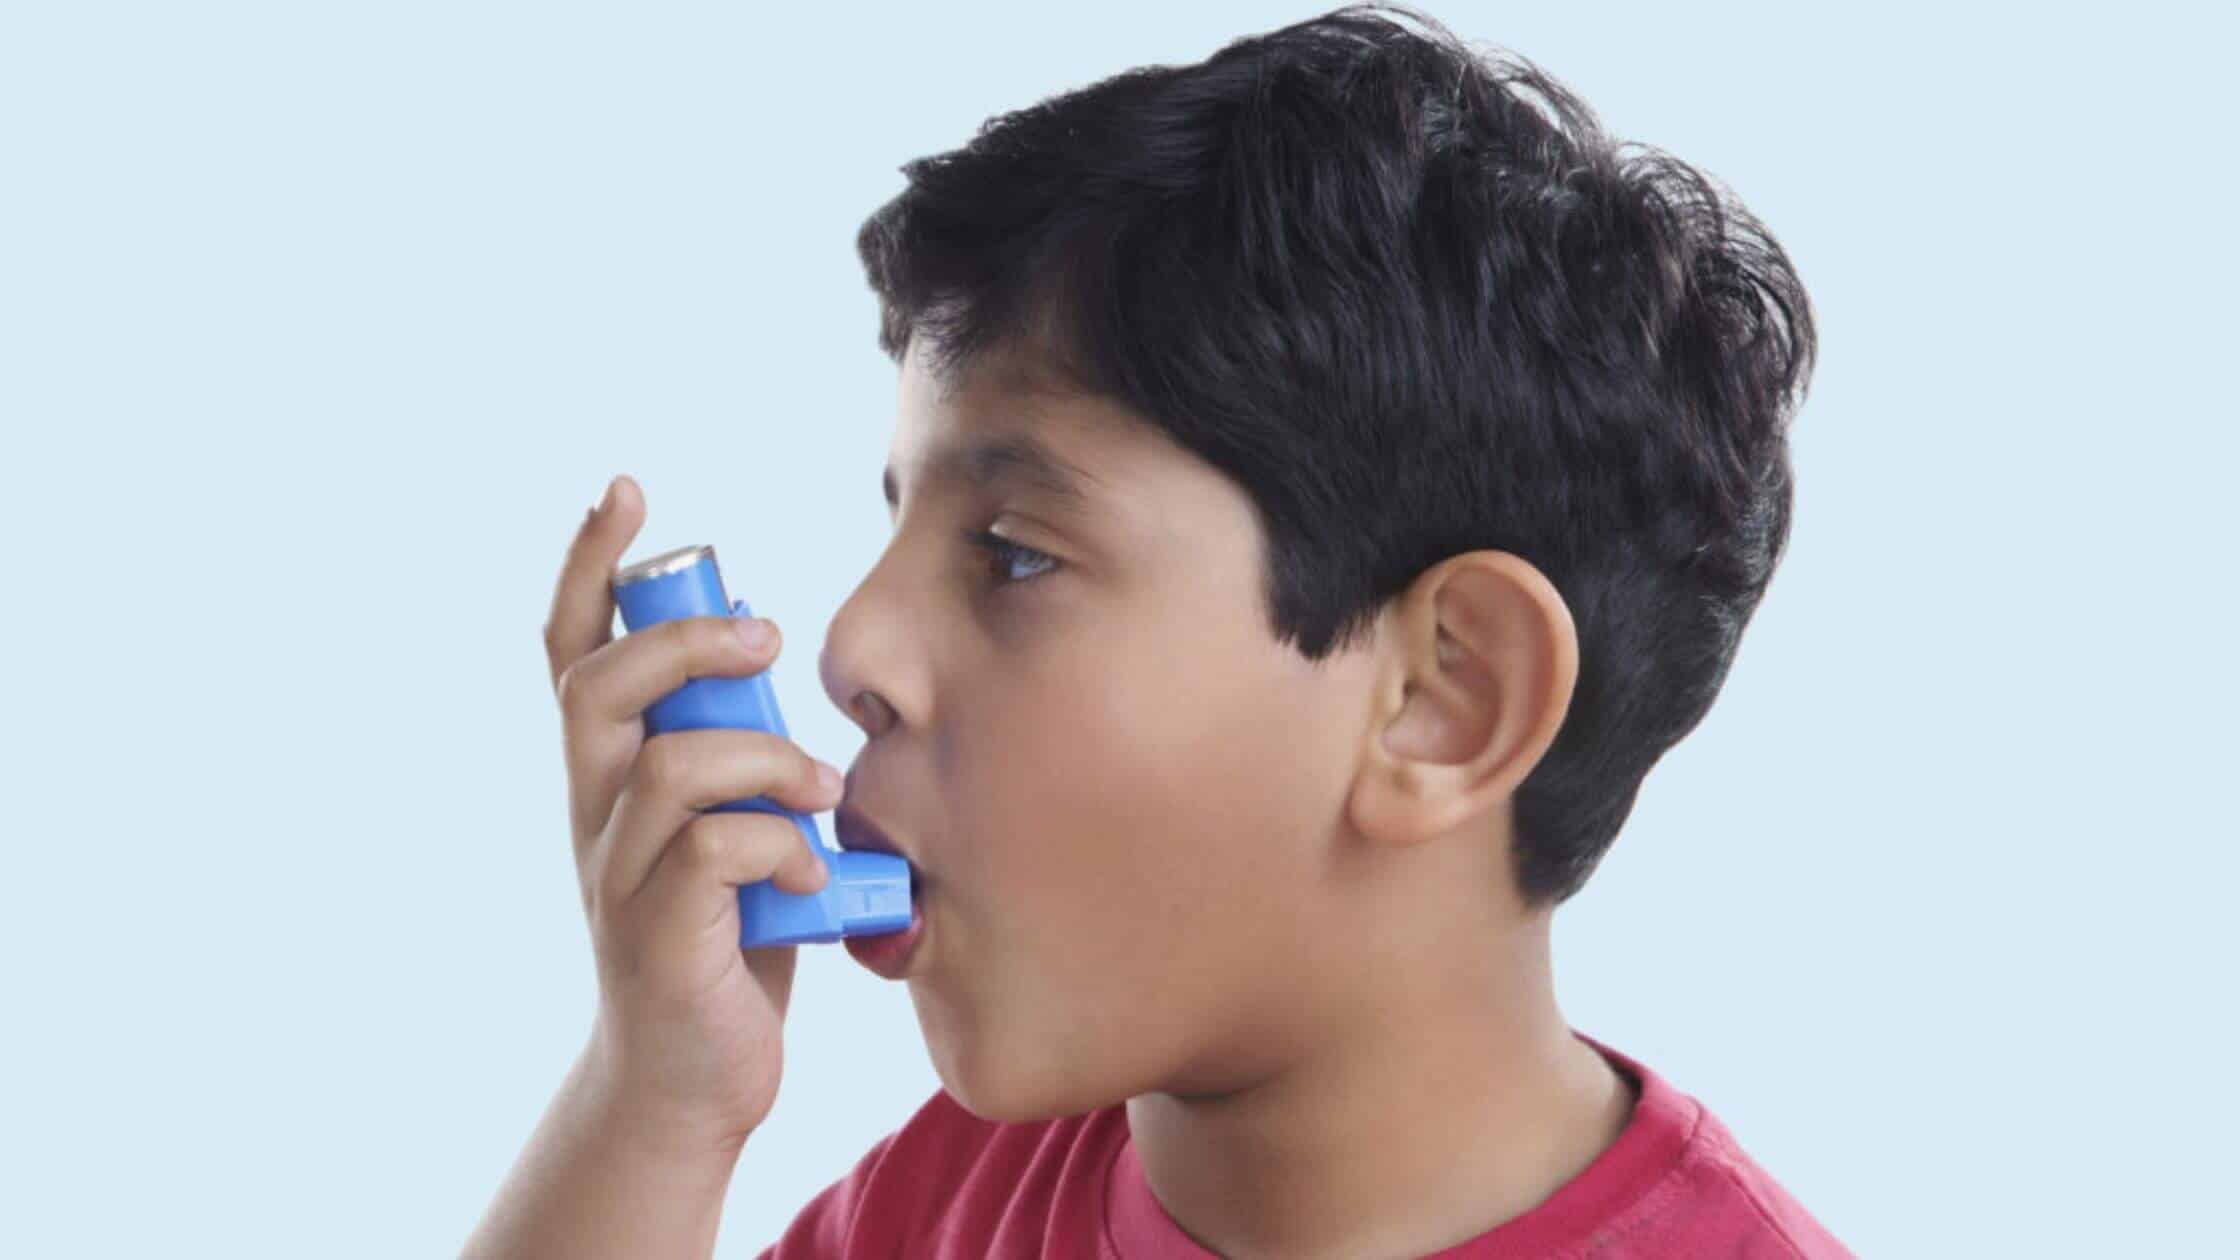 Studies Link Common Asthma & Allergy Steroids To Cognitive Decline